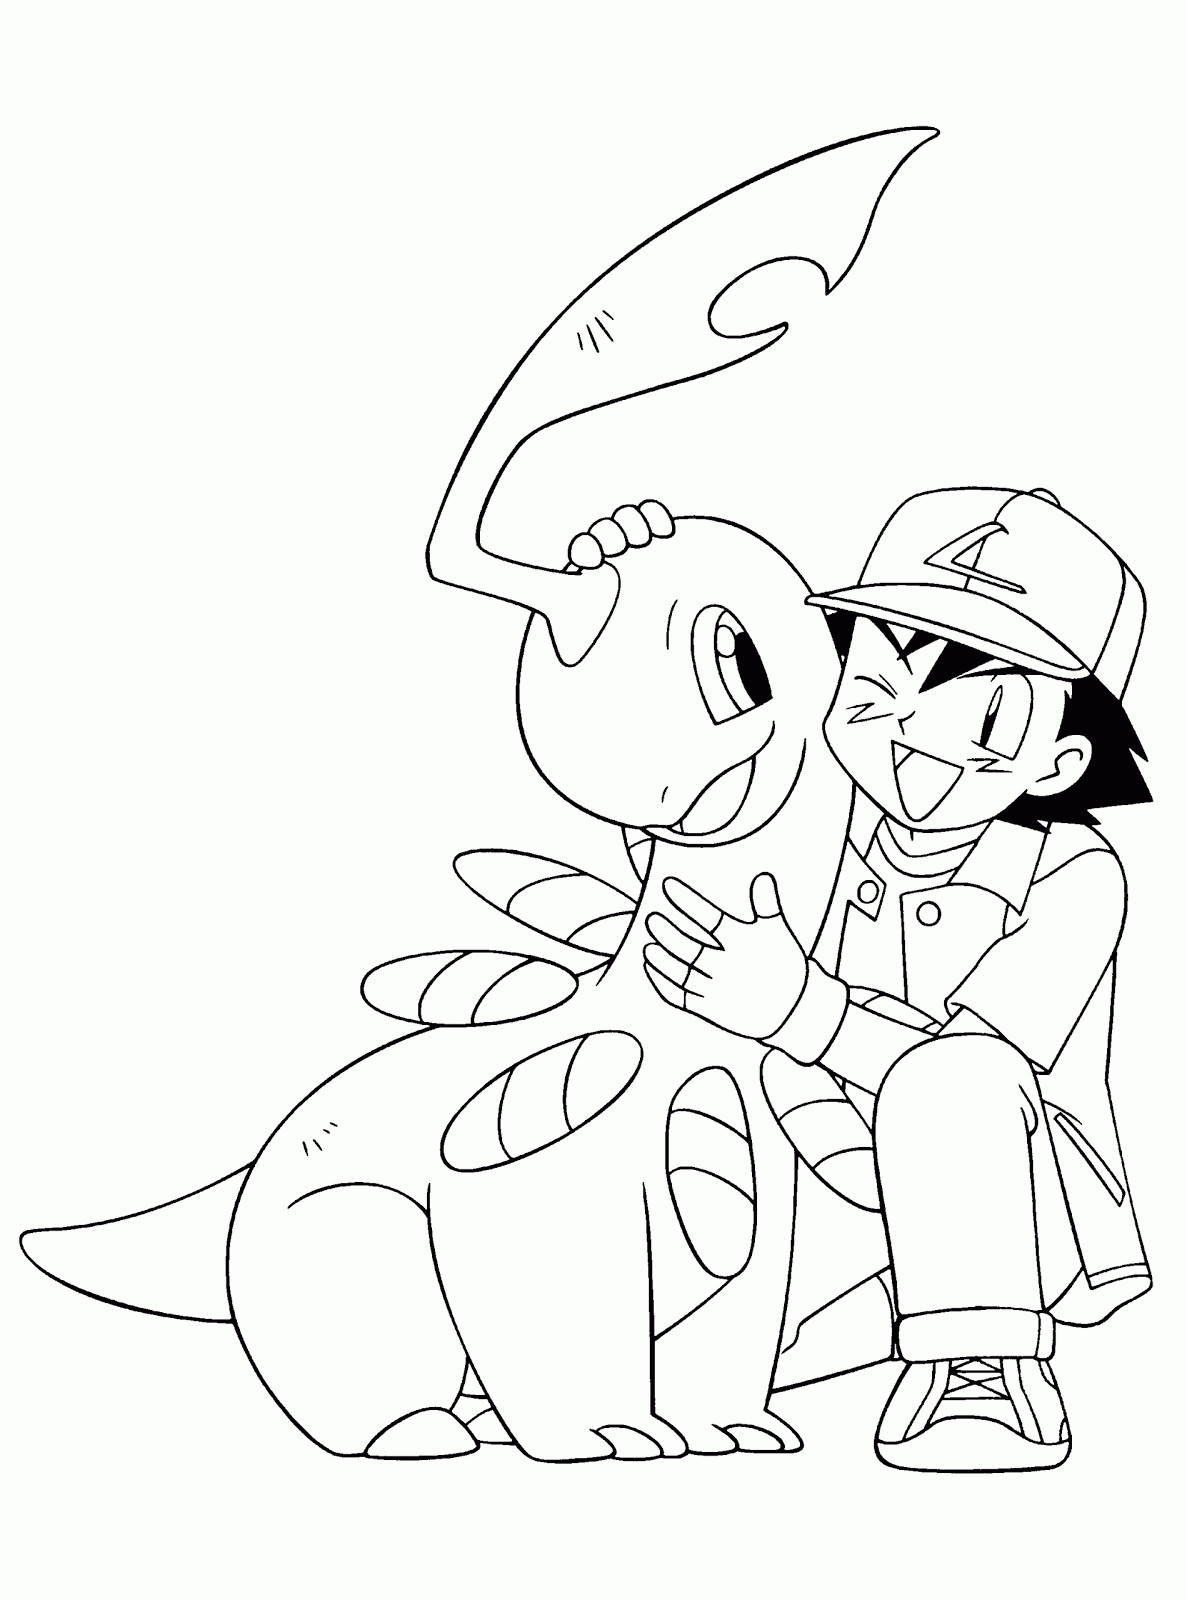 Dark Pokemon Coloring Pages For Boys
 Pokemon Coloring Pages